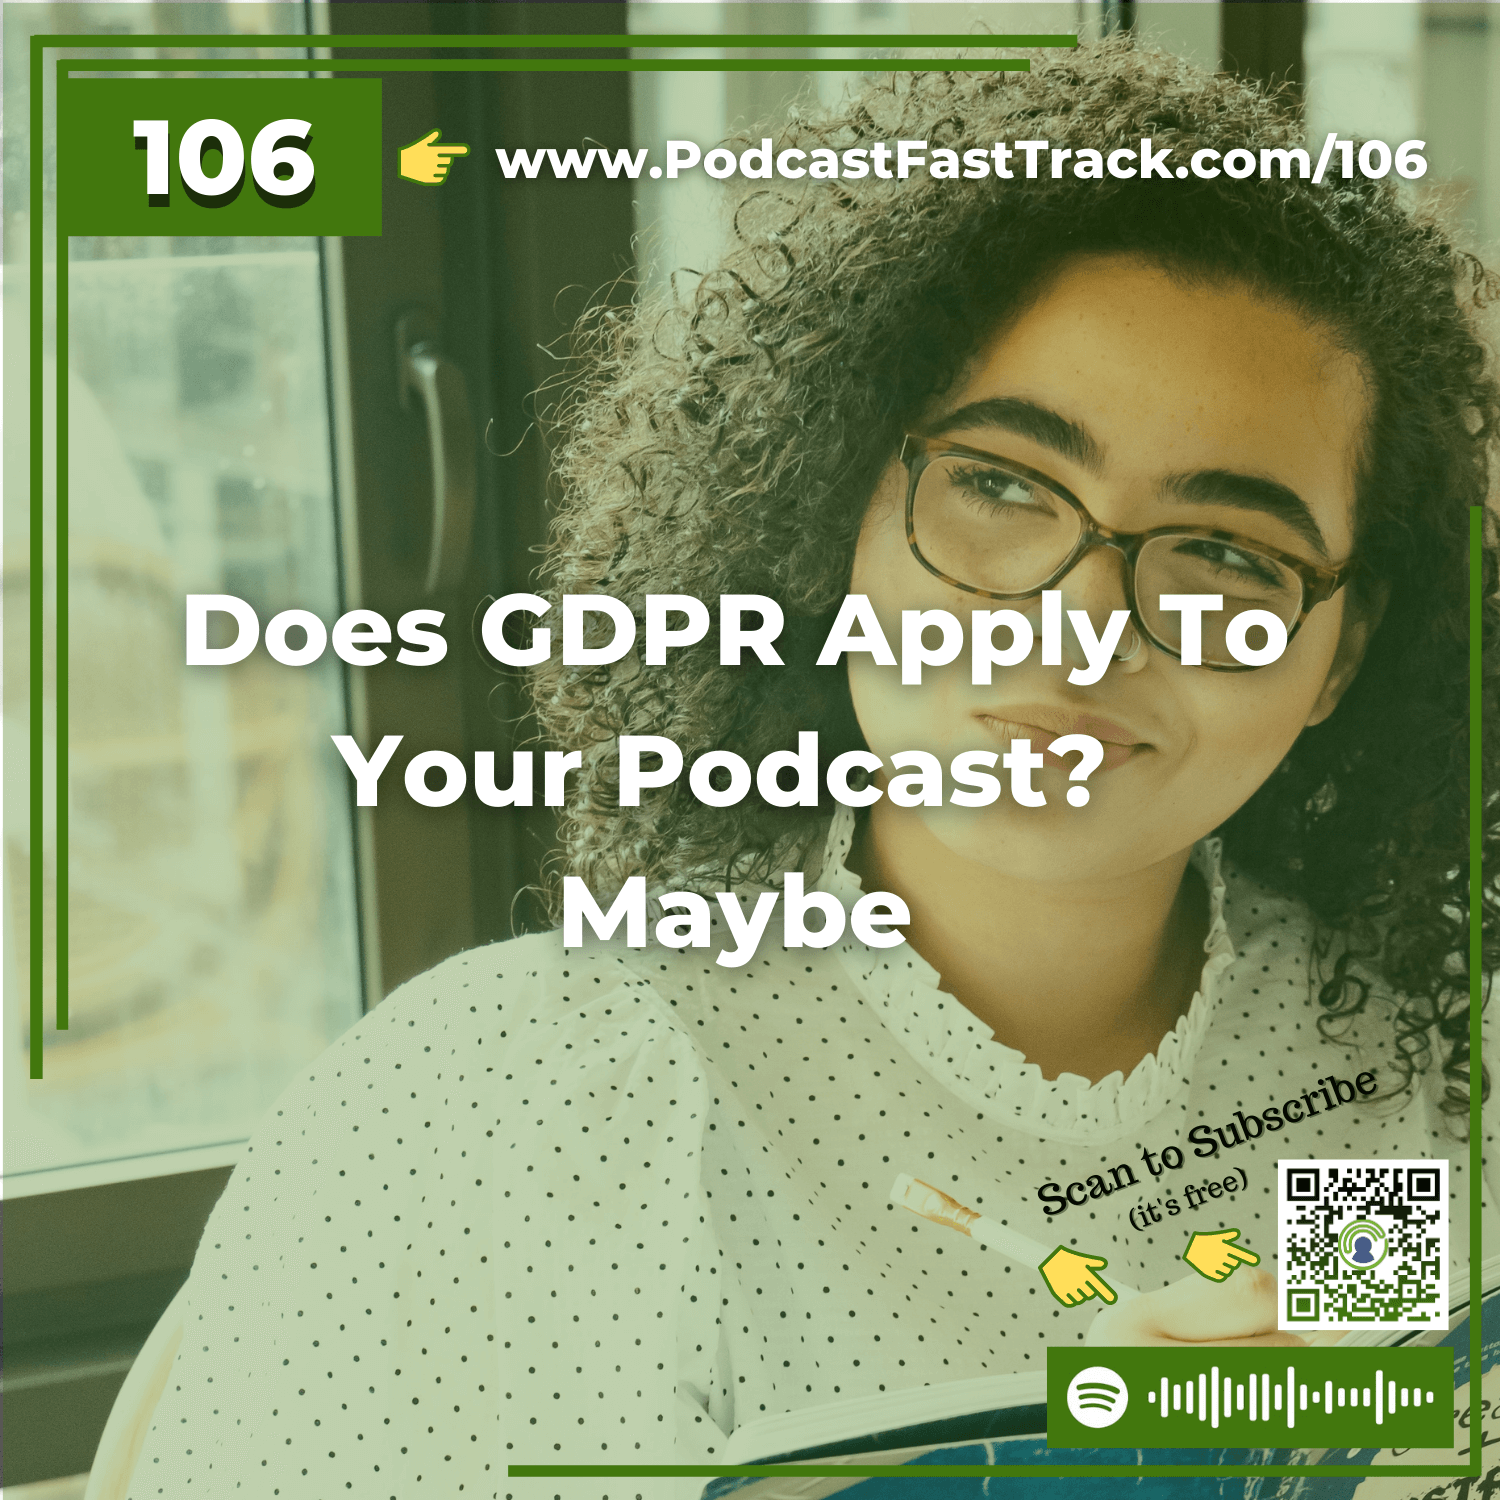 106: Does GDPR Apply To Your Podcast? Maybe